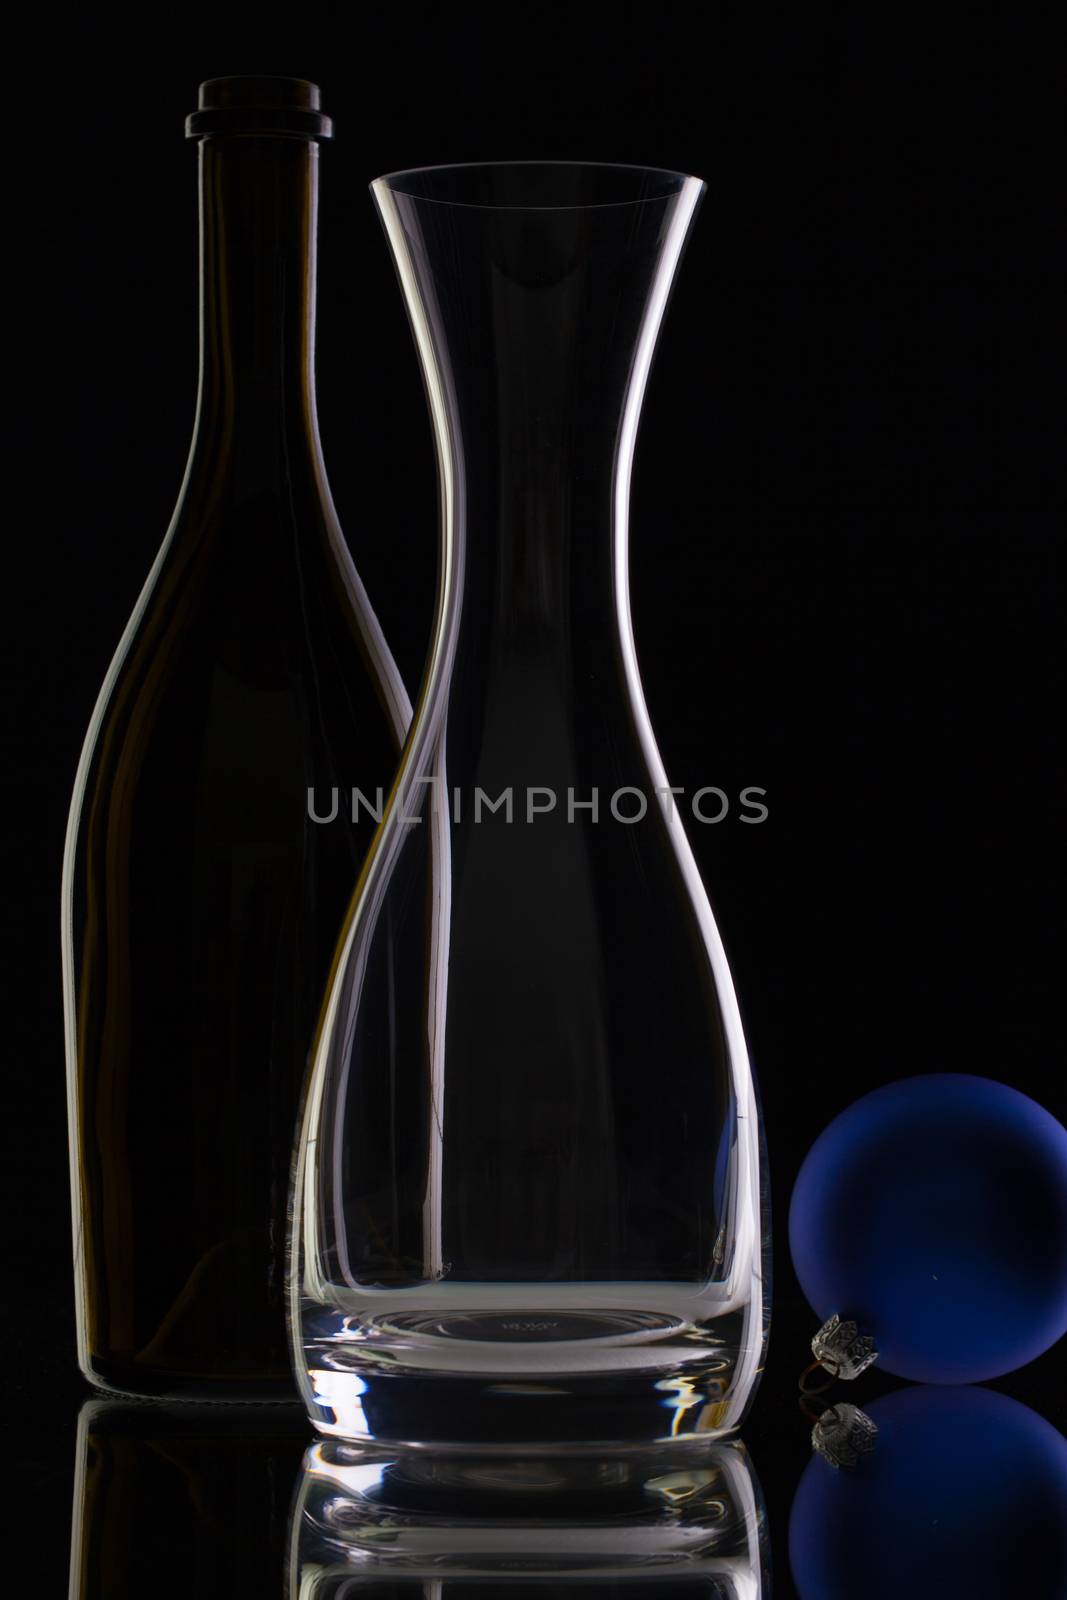 The bottle of wine,glass carafe and Christmas decoration  by CaptureLight